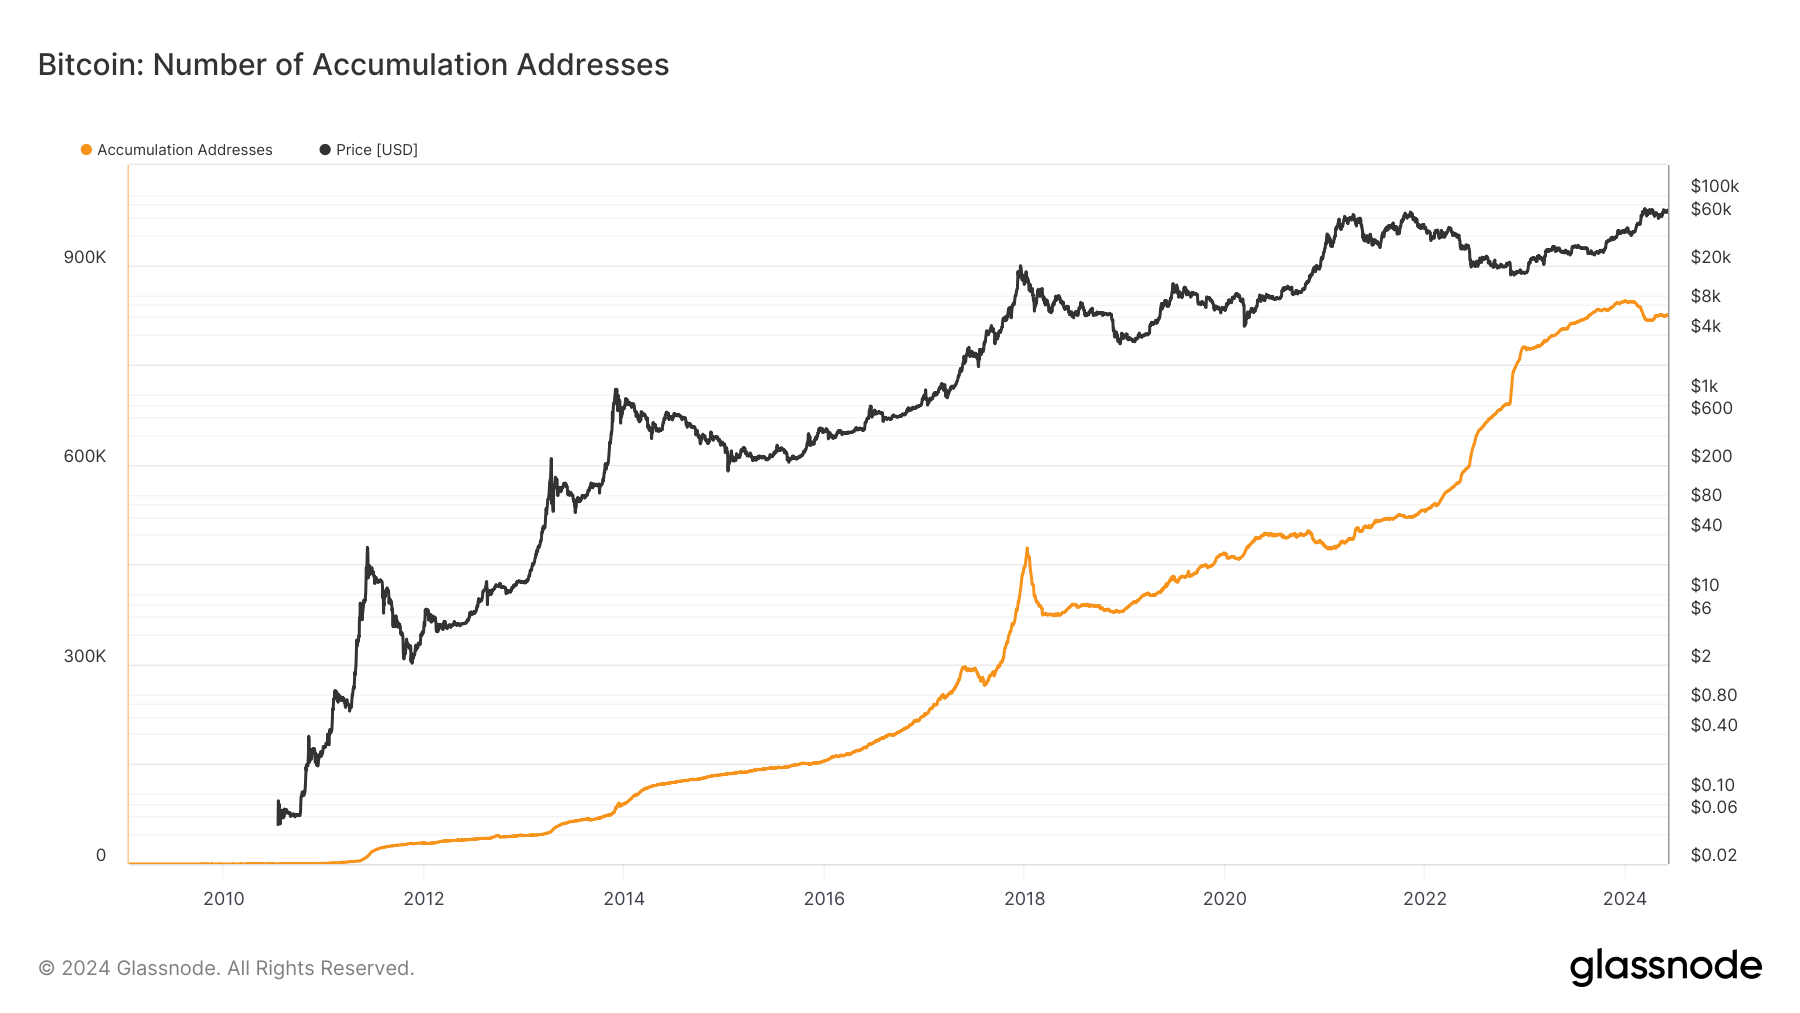 Bitcoin Accumulation Addresses on the Rise